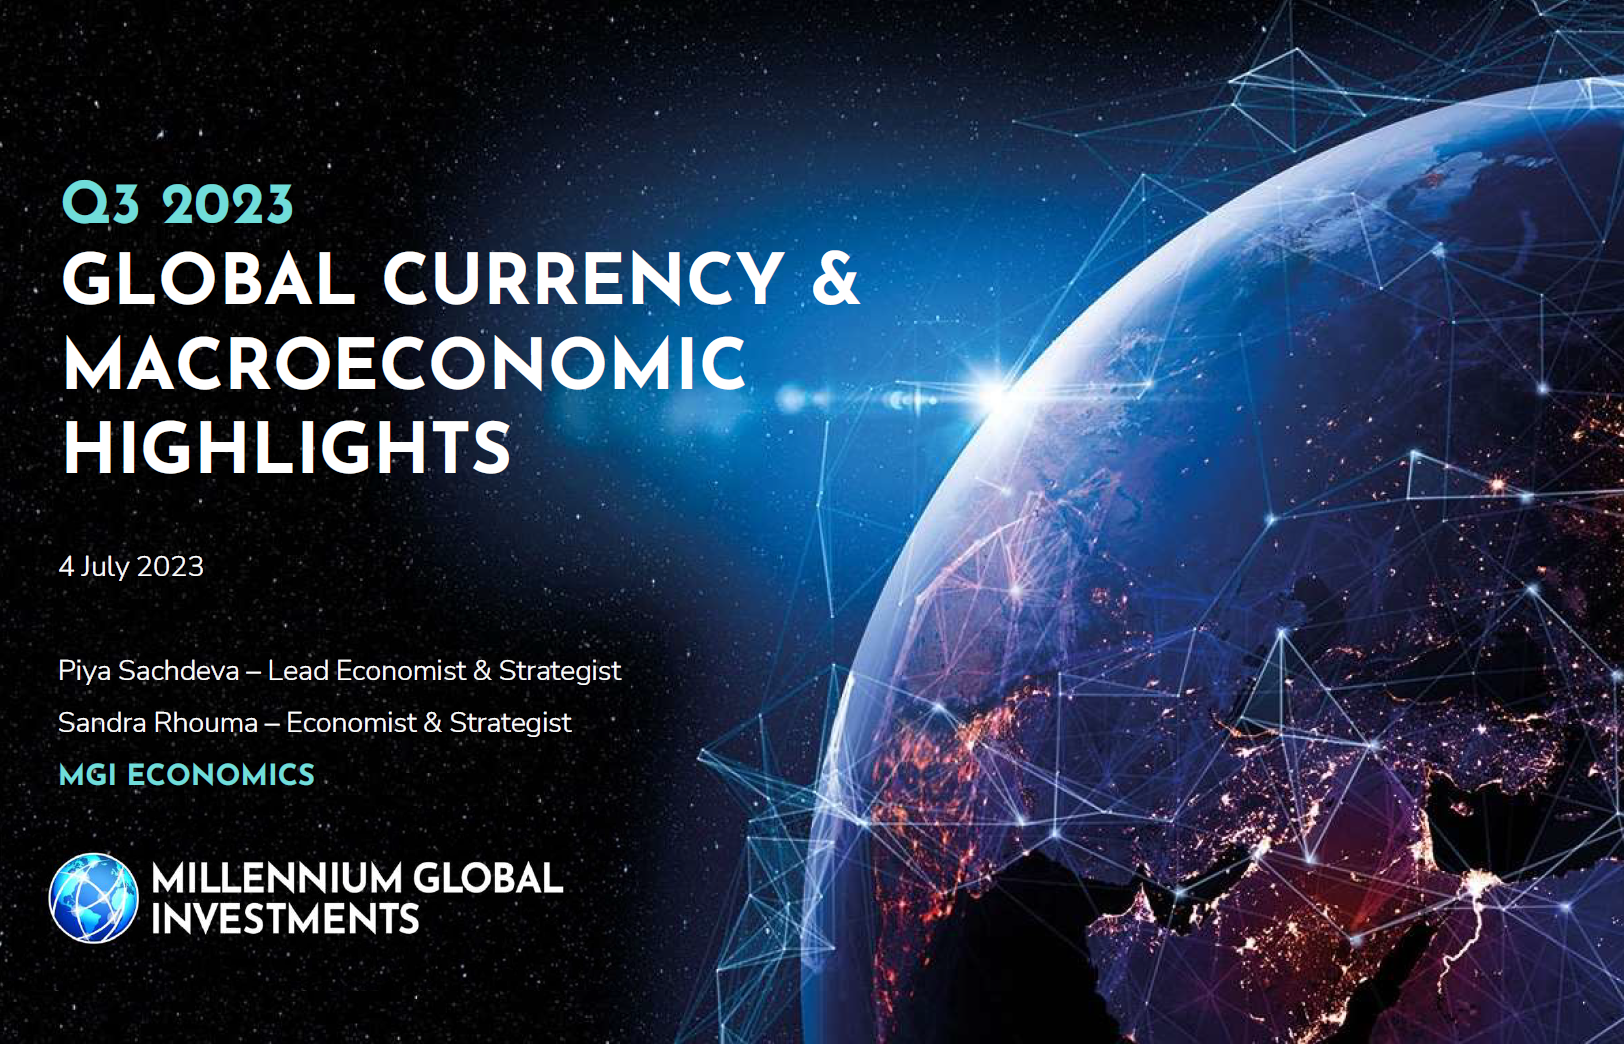 Q3 2023 Global Currency and Macroeconomic Outlook